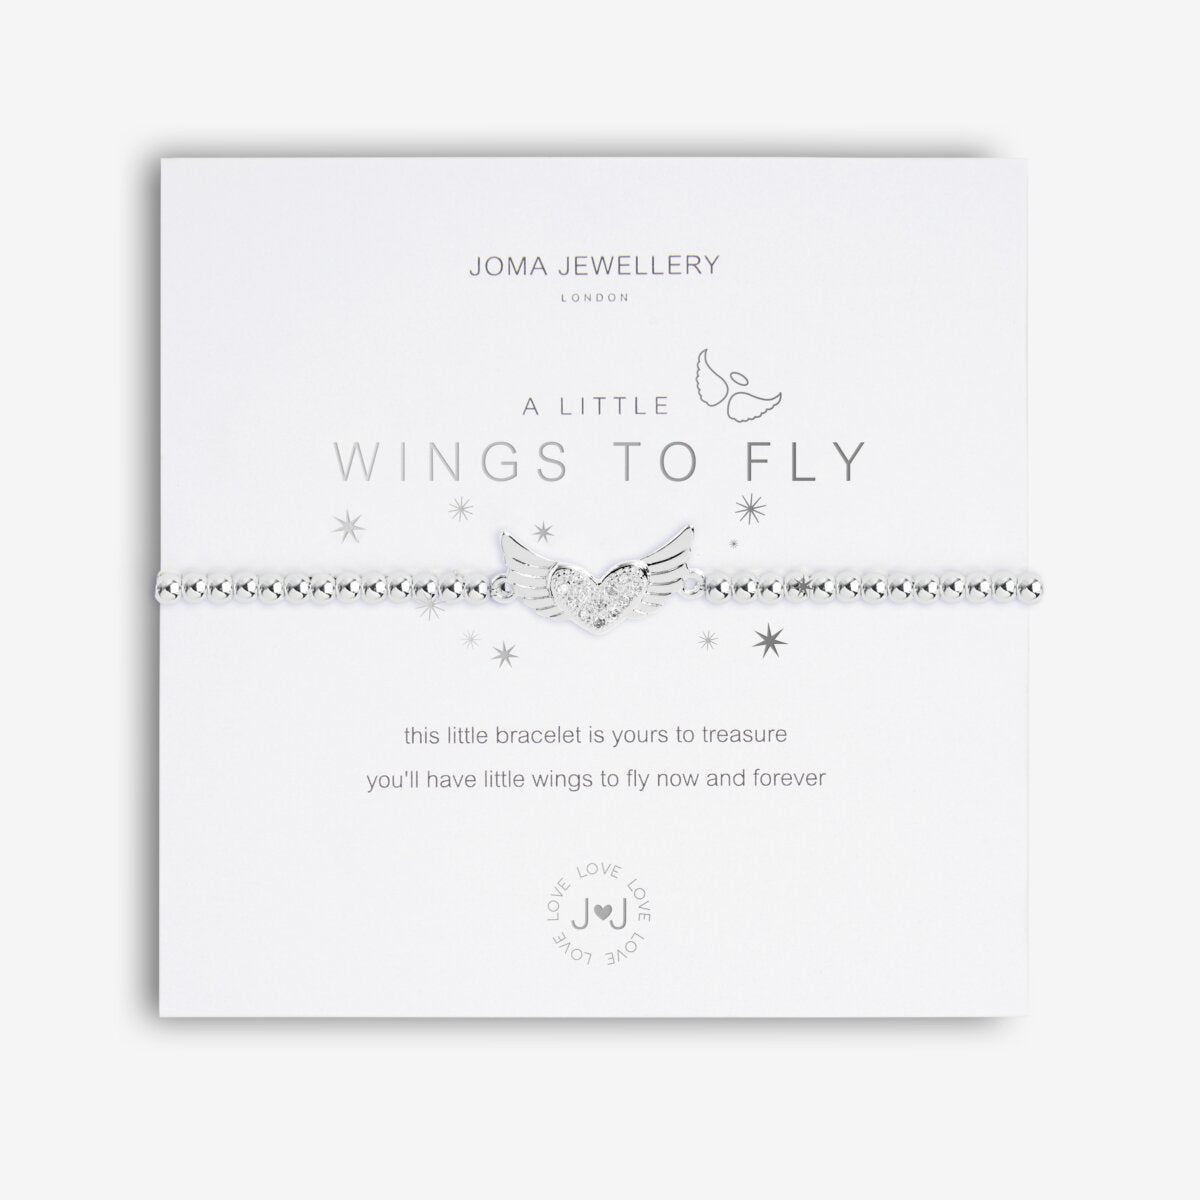 Joma Jewellery 'A Little' Wings To Fly